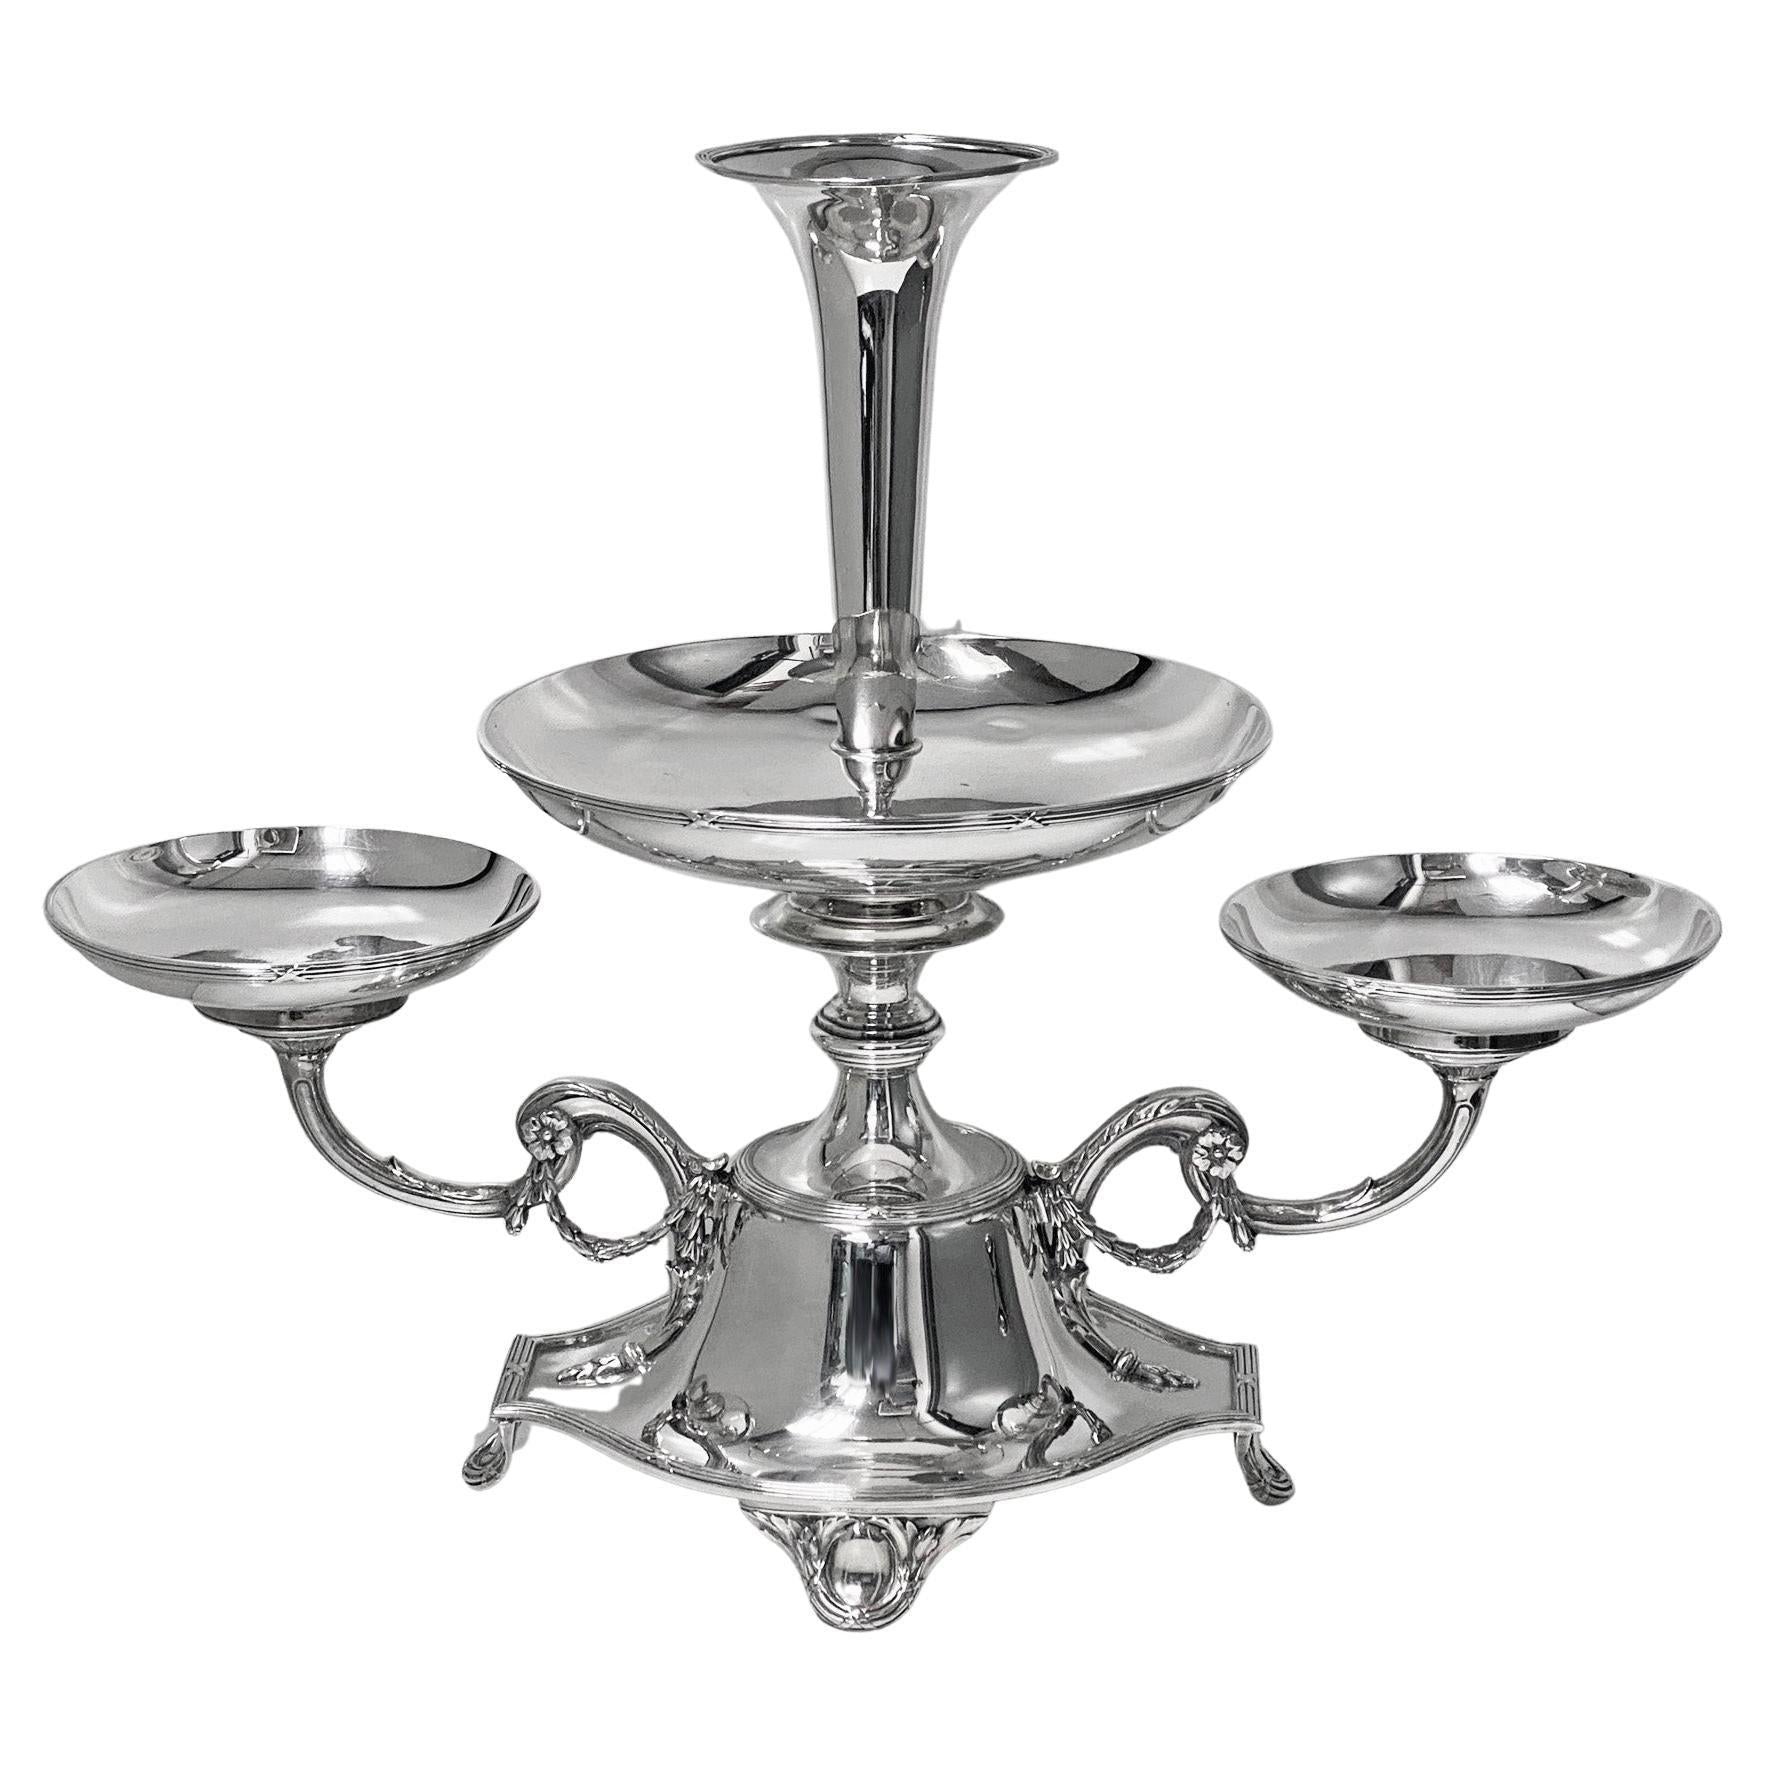 Elkington Silver plate Centerpiece Epergne for Fruit and Flowers, 1925